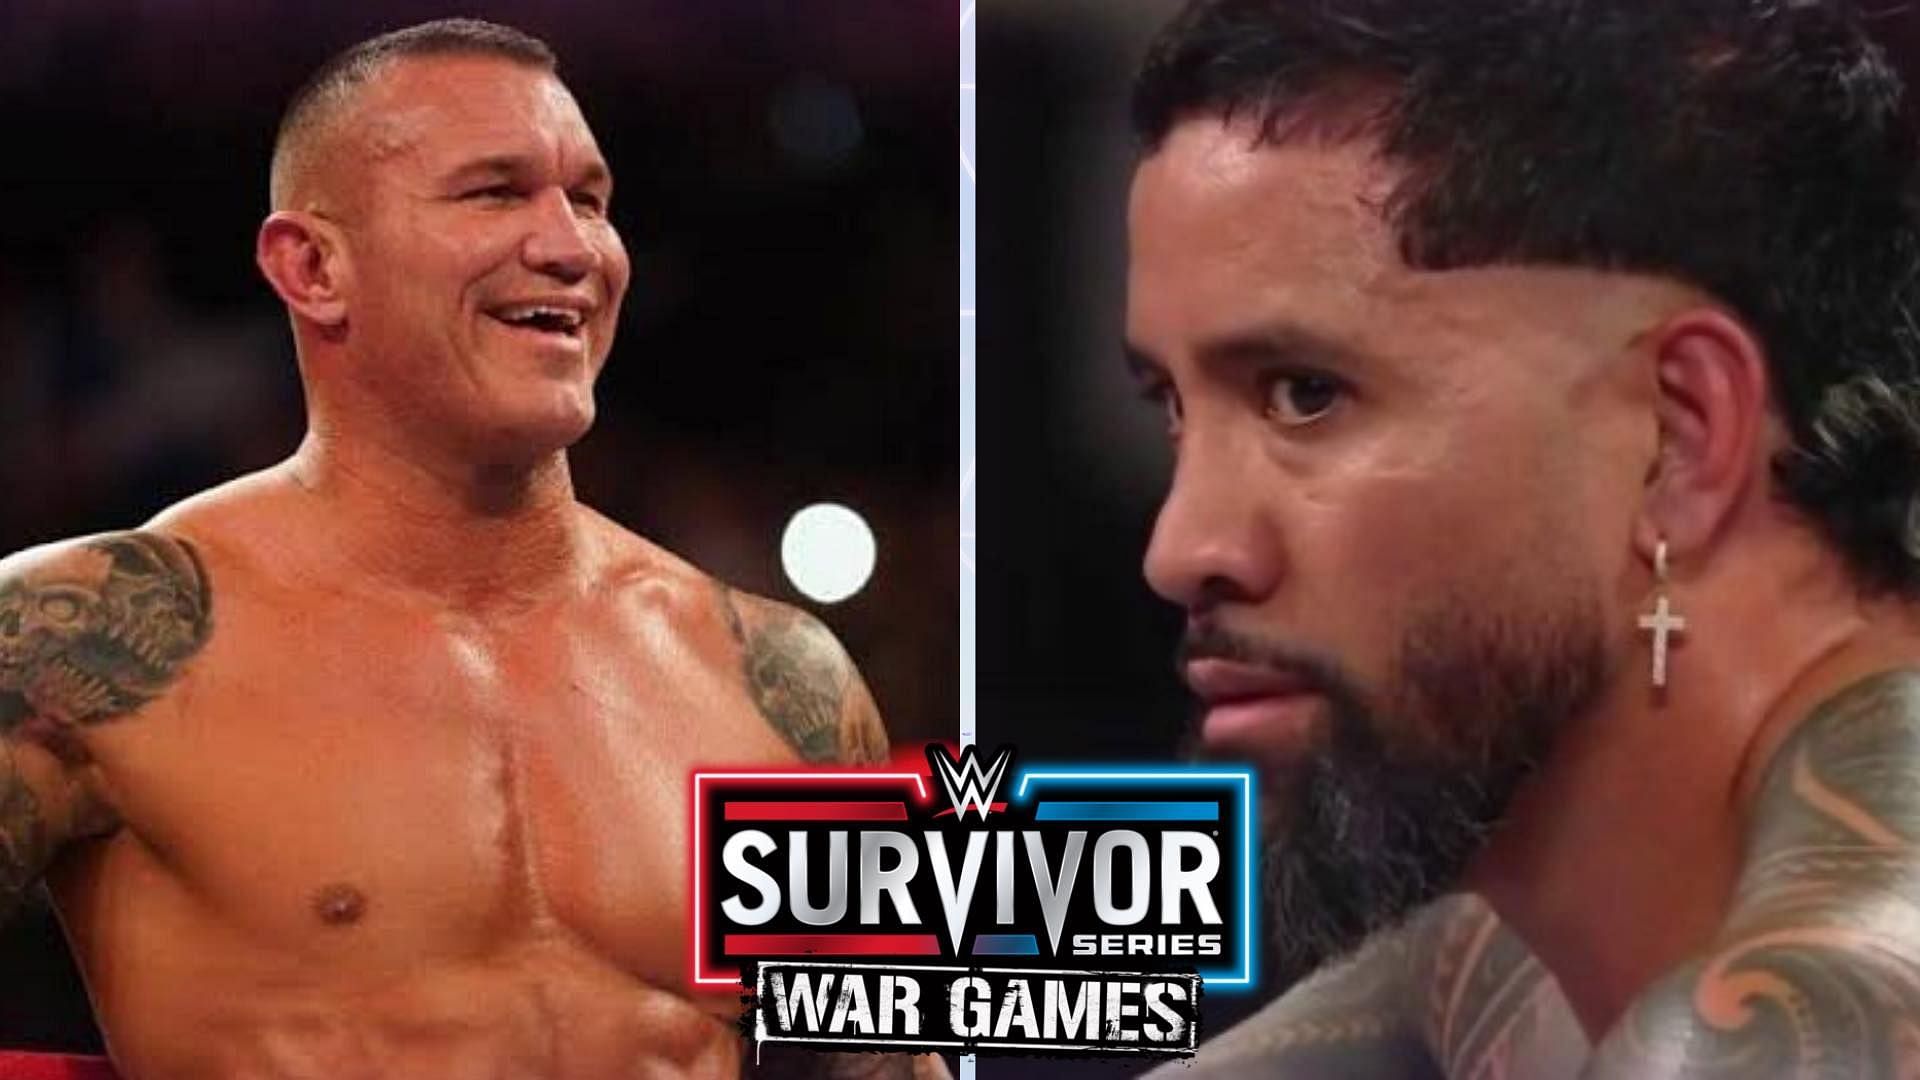 Randy Orton and Jey Uso will join forces at Survivor Series: WarGames.